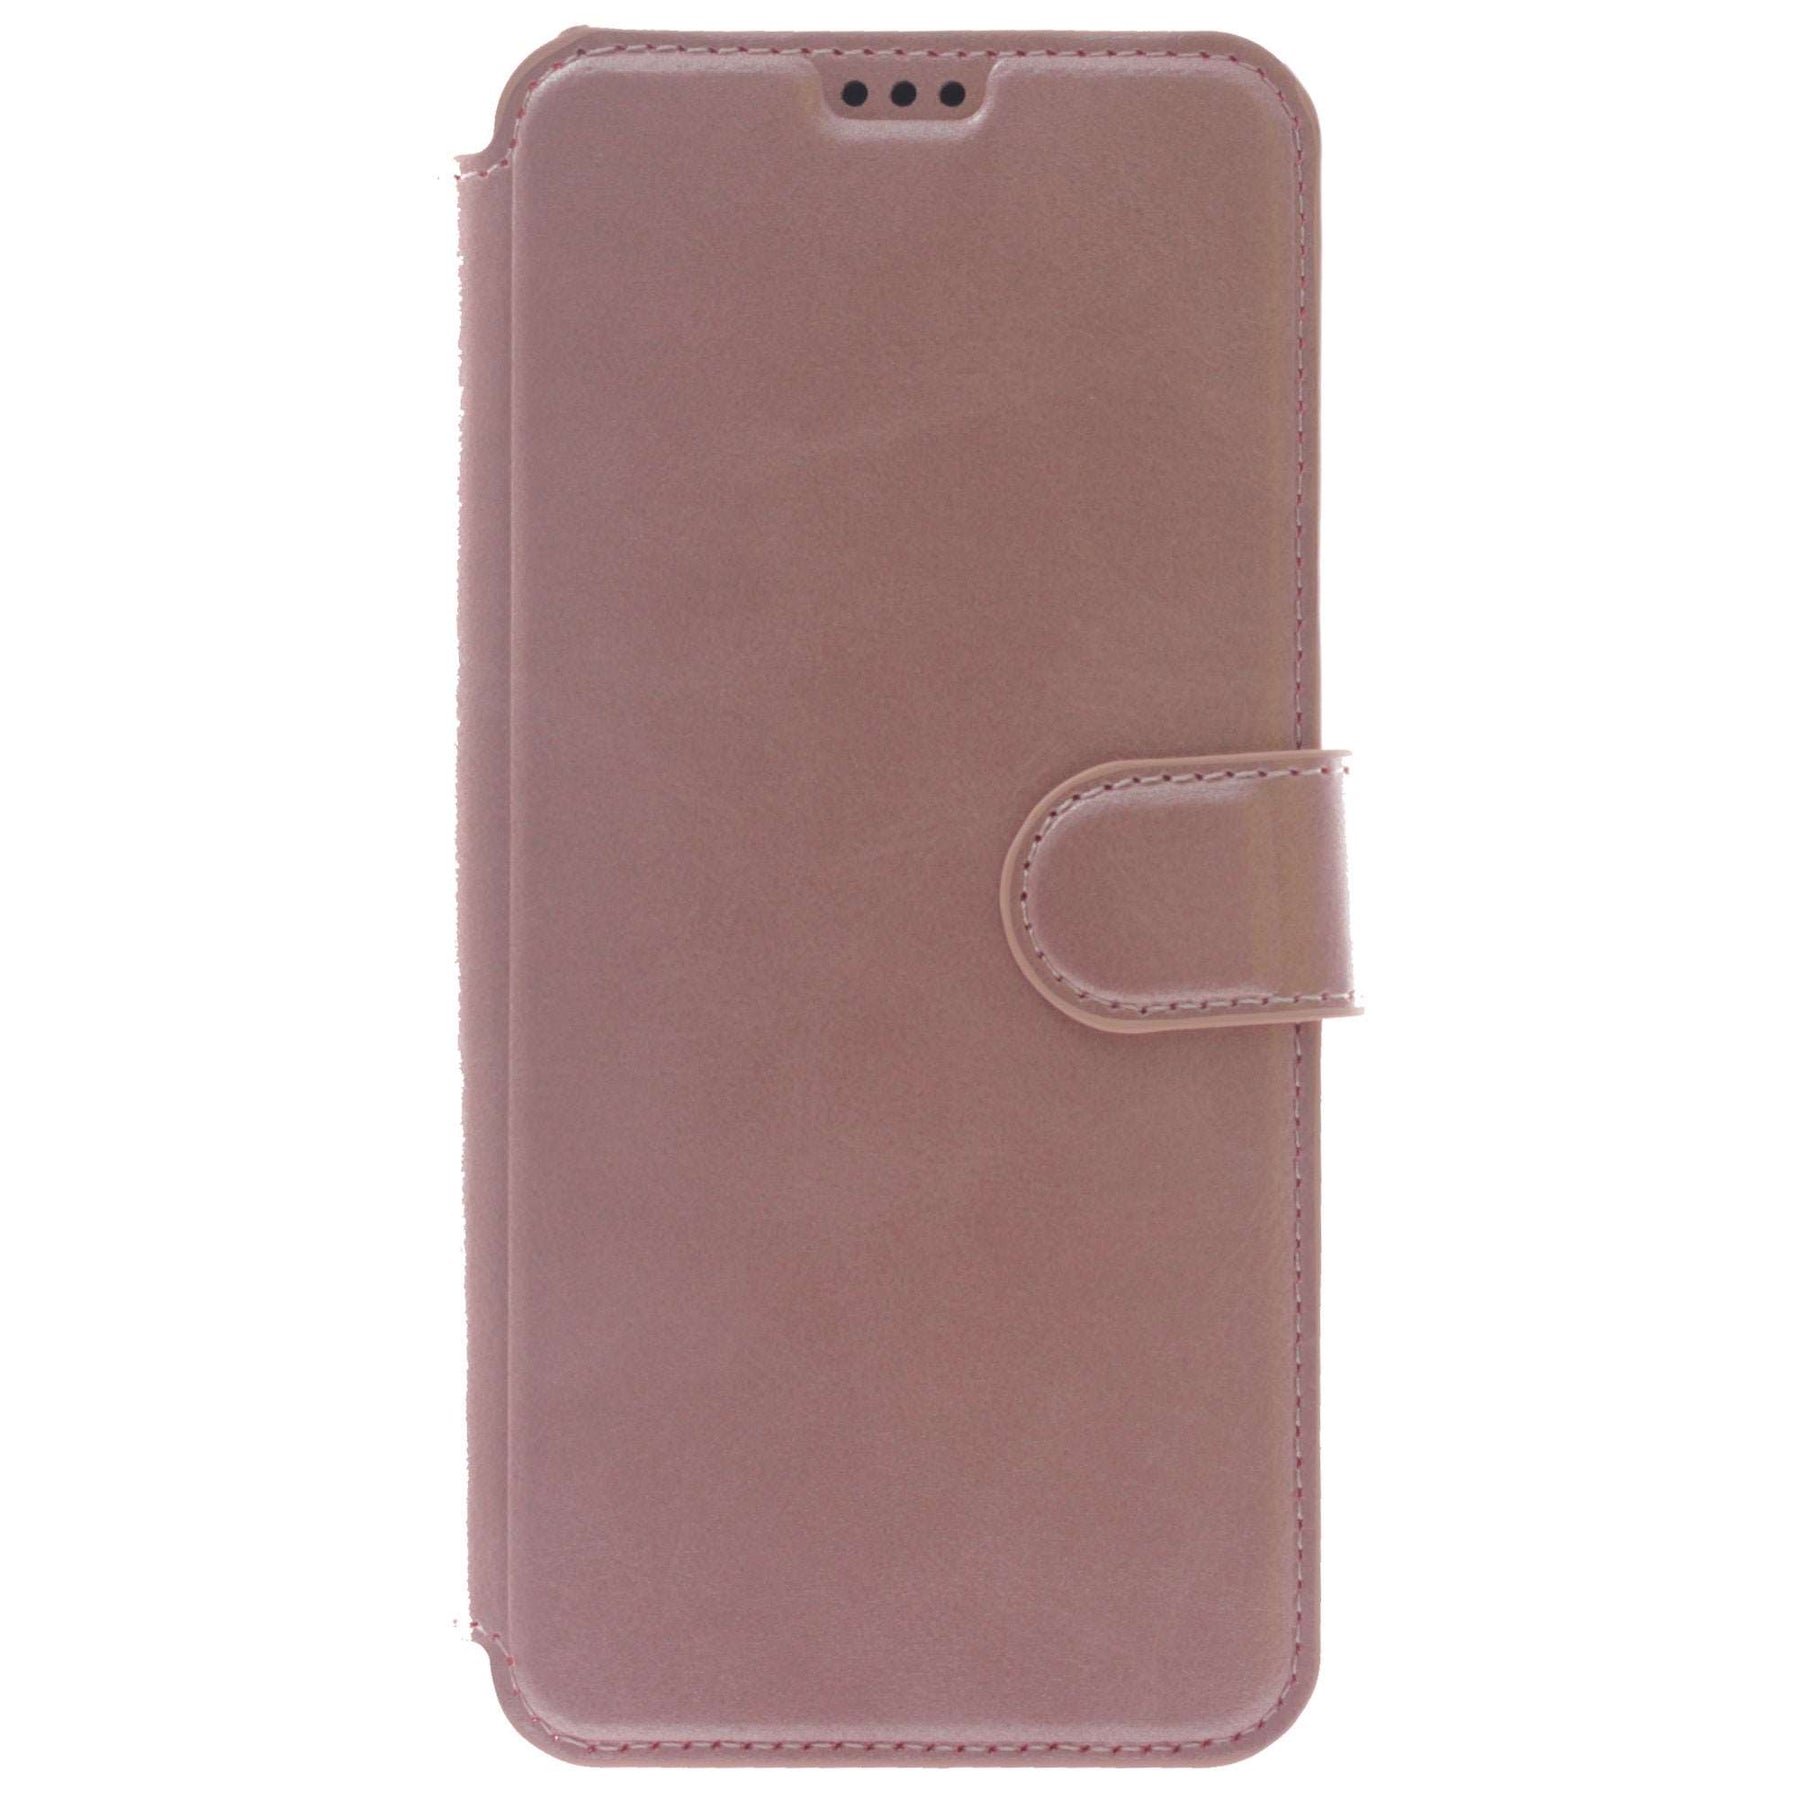 Xiaomi, Redmi 9AT, Leather Wallet Case, Color Pink.